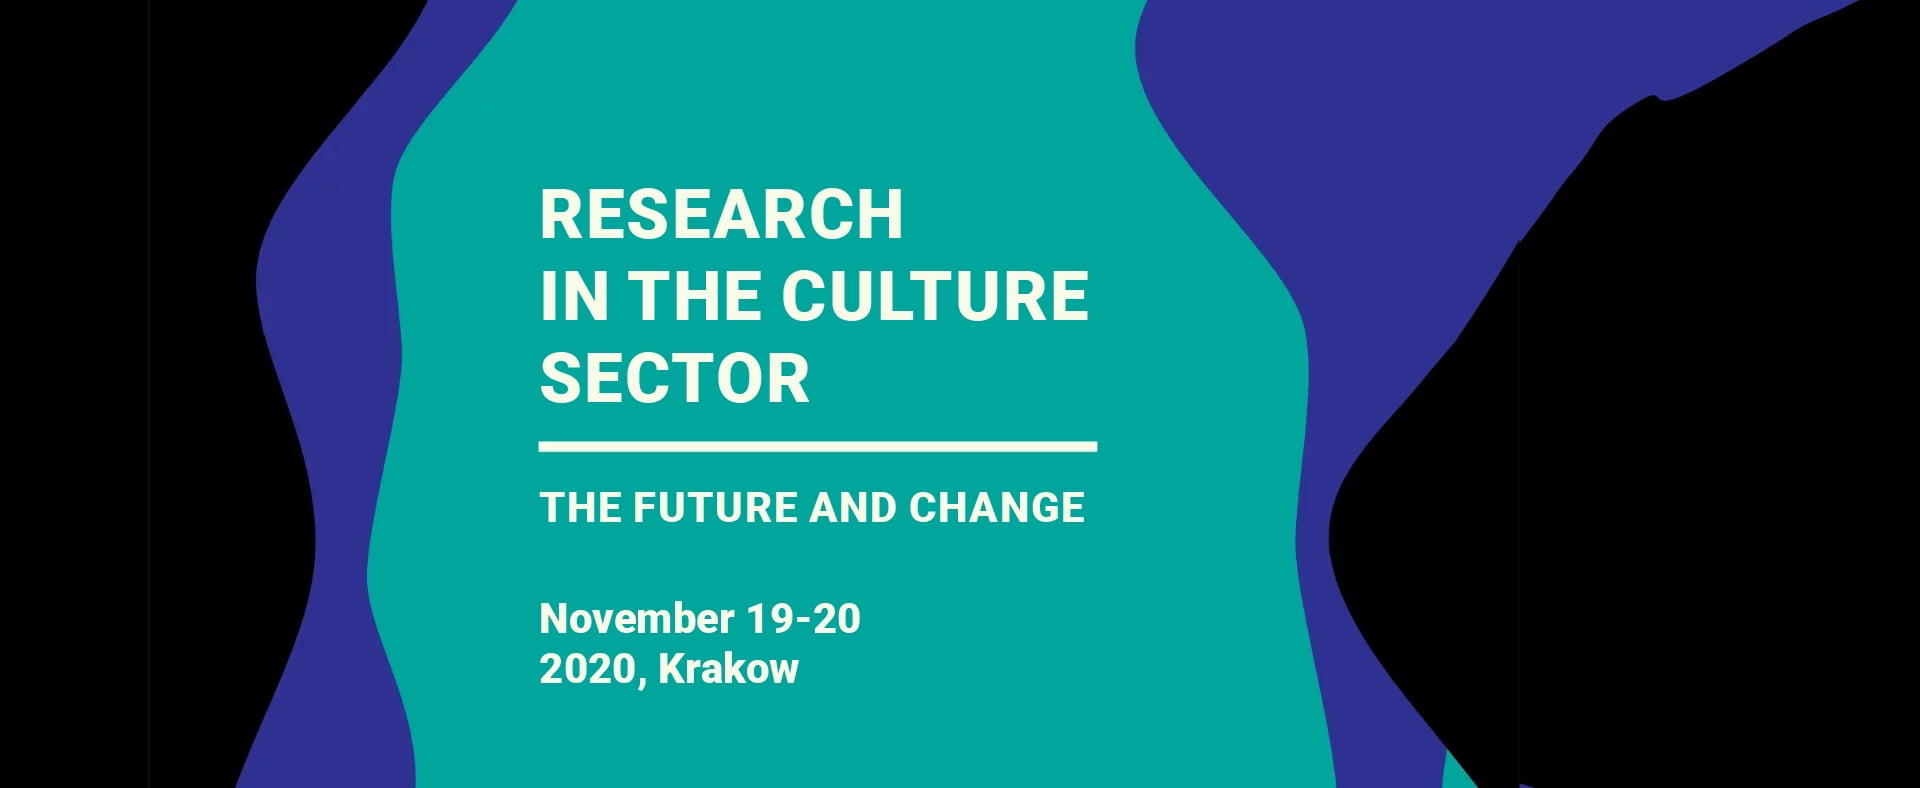 Research in the culture sector